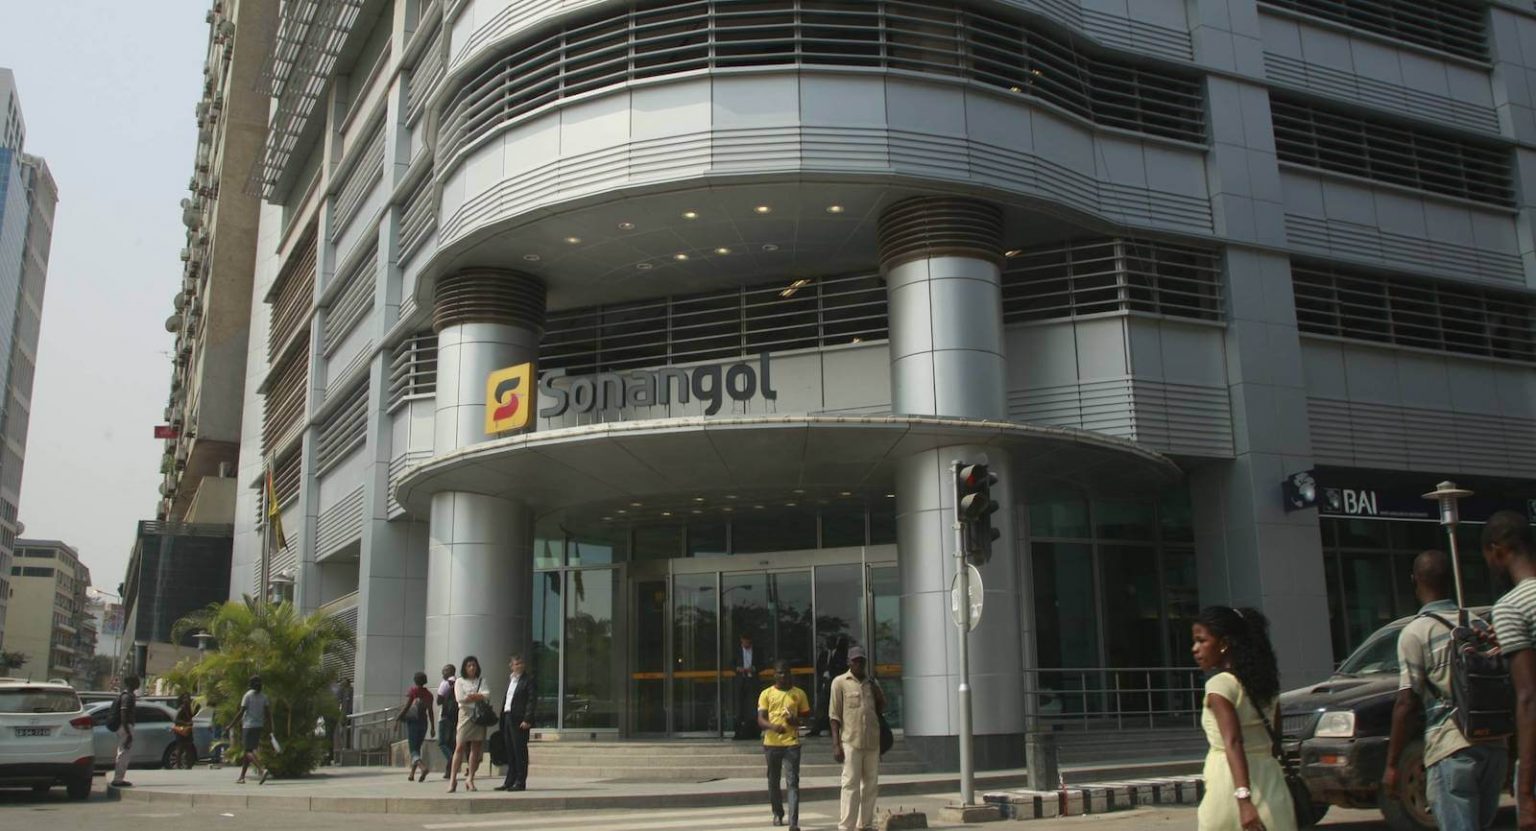 Sub-Saharan Africa M&A transactions and fees declined in Q1 2020. Africatel Holdings’ US$1.0 billion sale of PT Ventures to Angolan Sonangol in January was the largest deal in the region during the first quarter of 2020. www.theexchange.africa